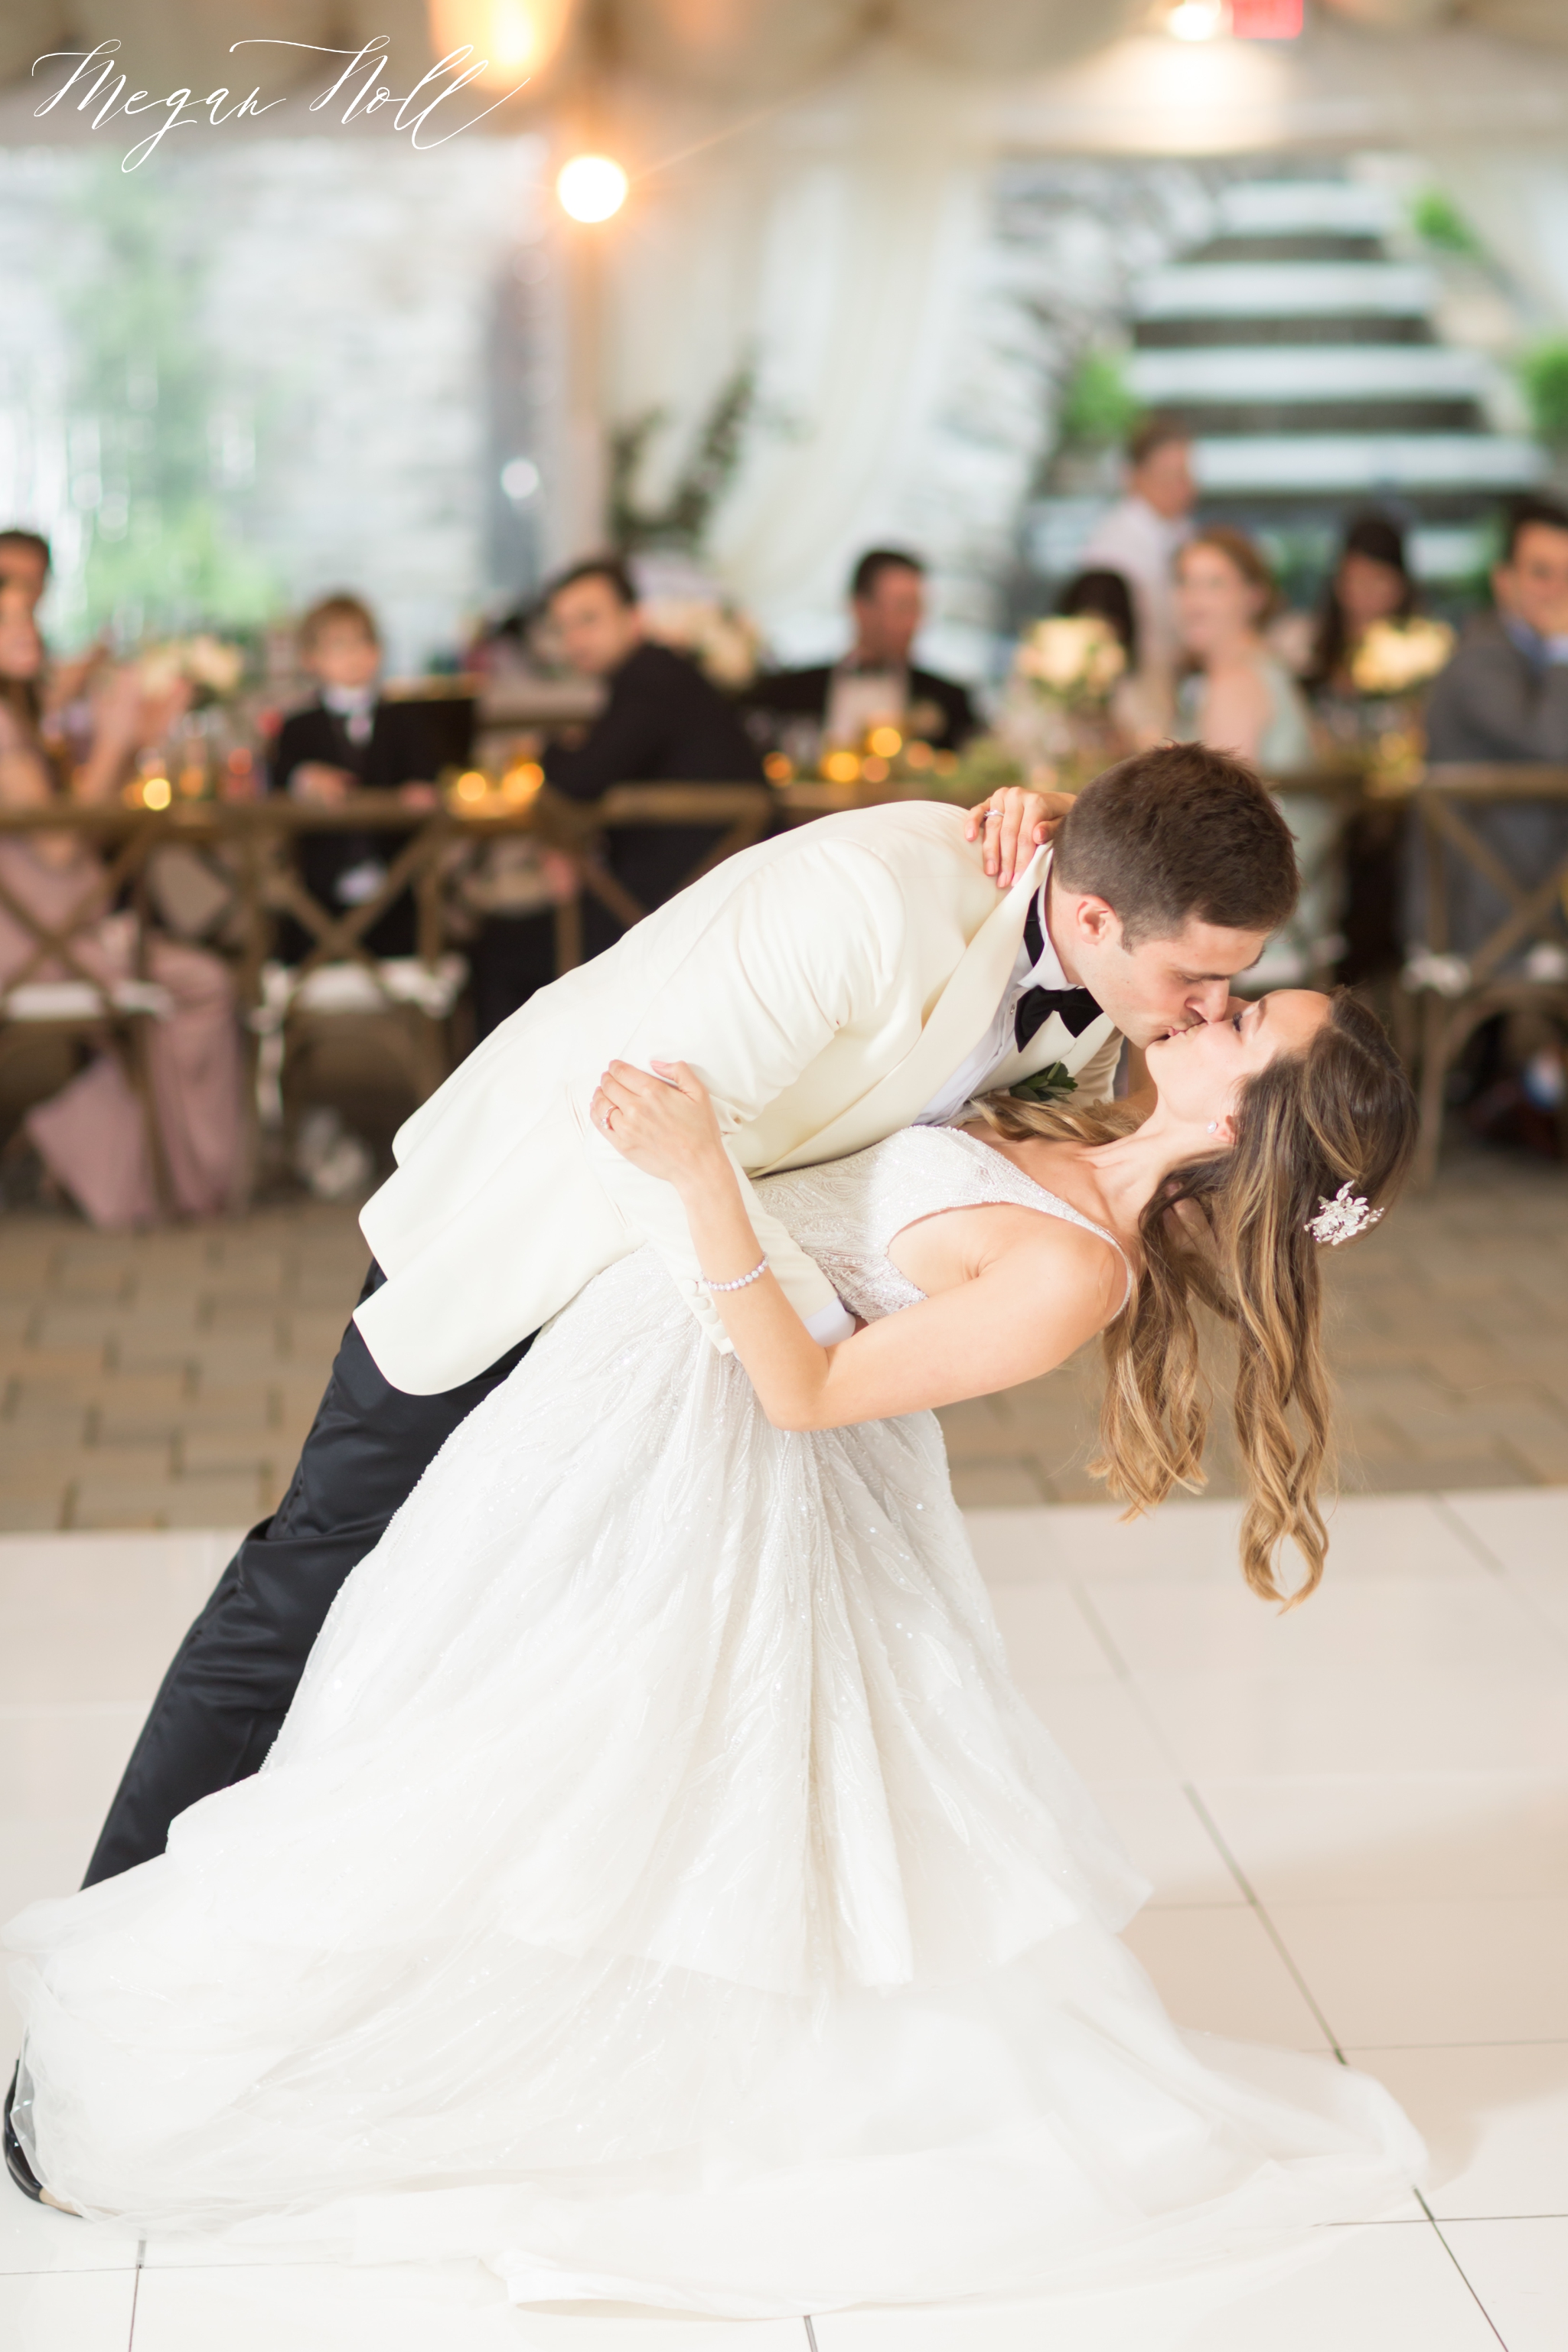 First Dance dip for Bride and Groom at Greenacres Wedding Reception